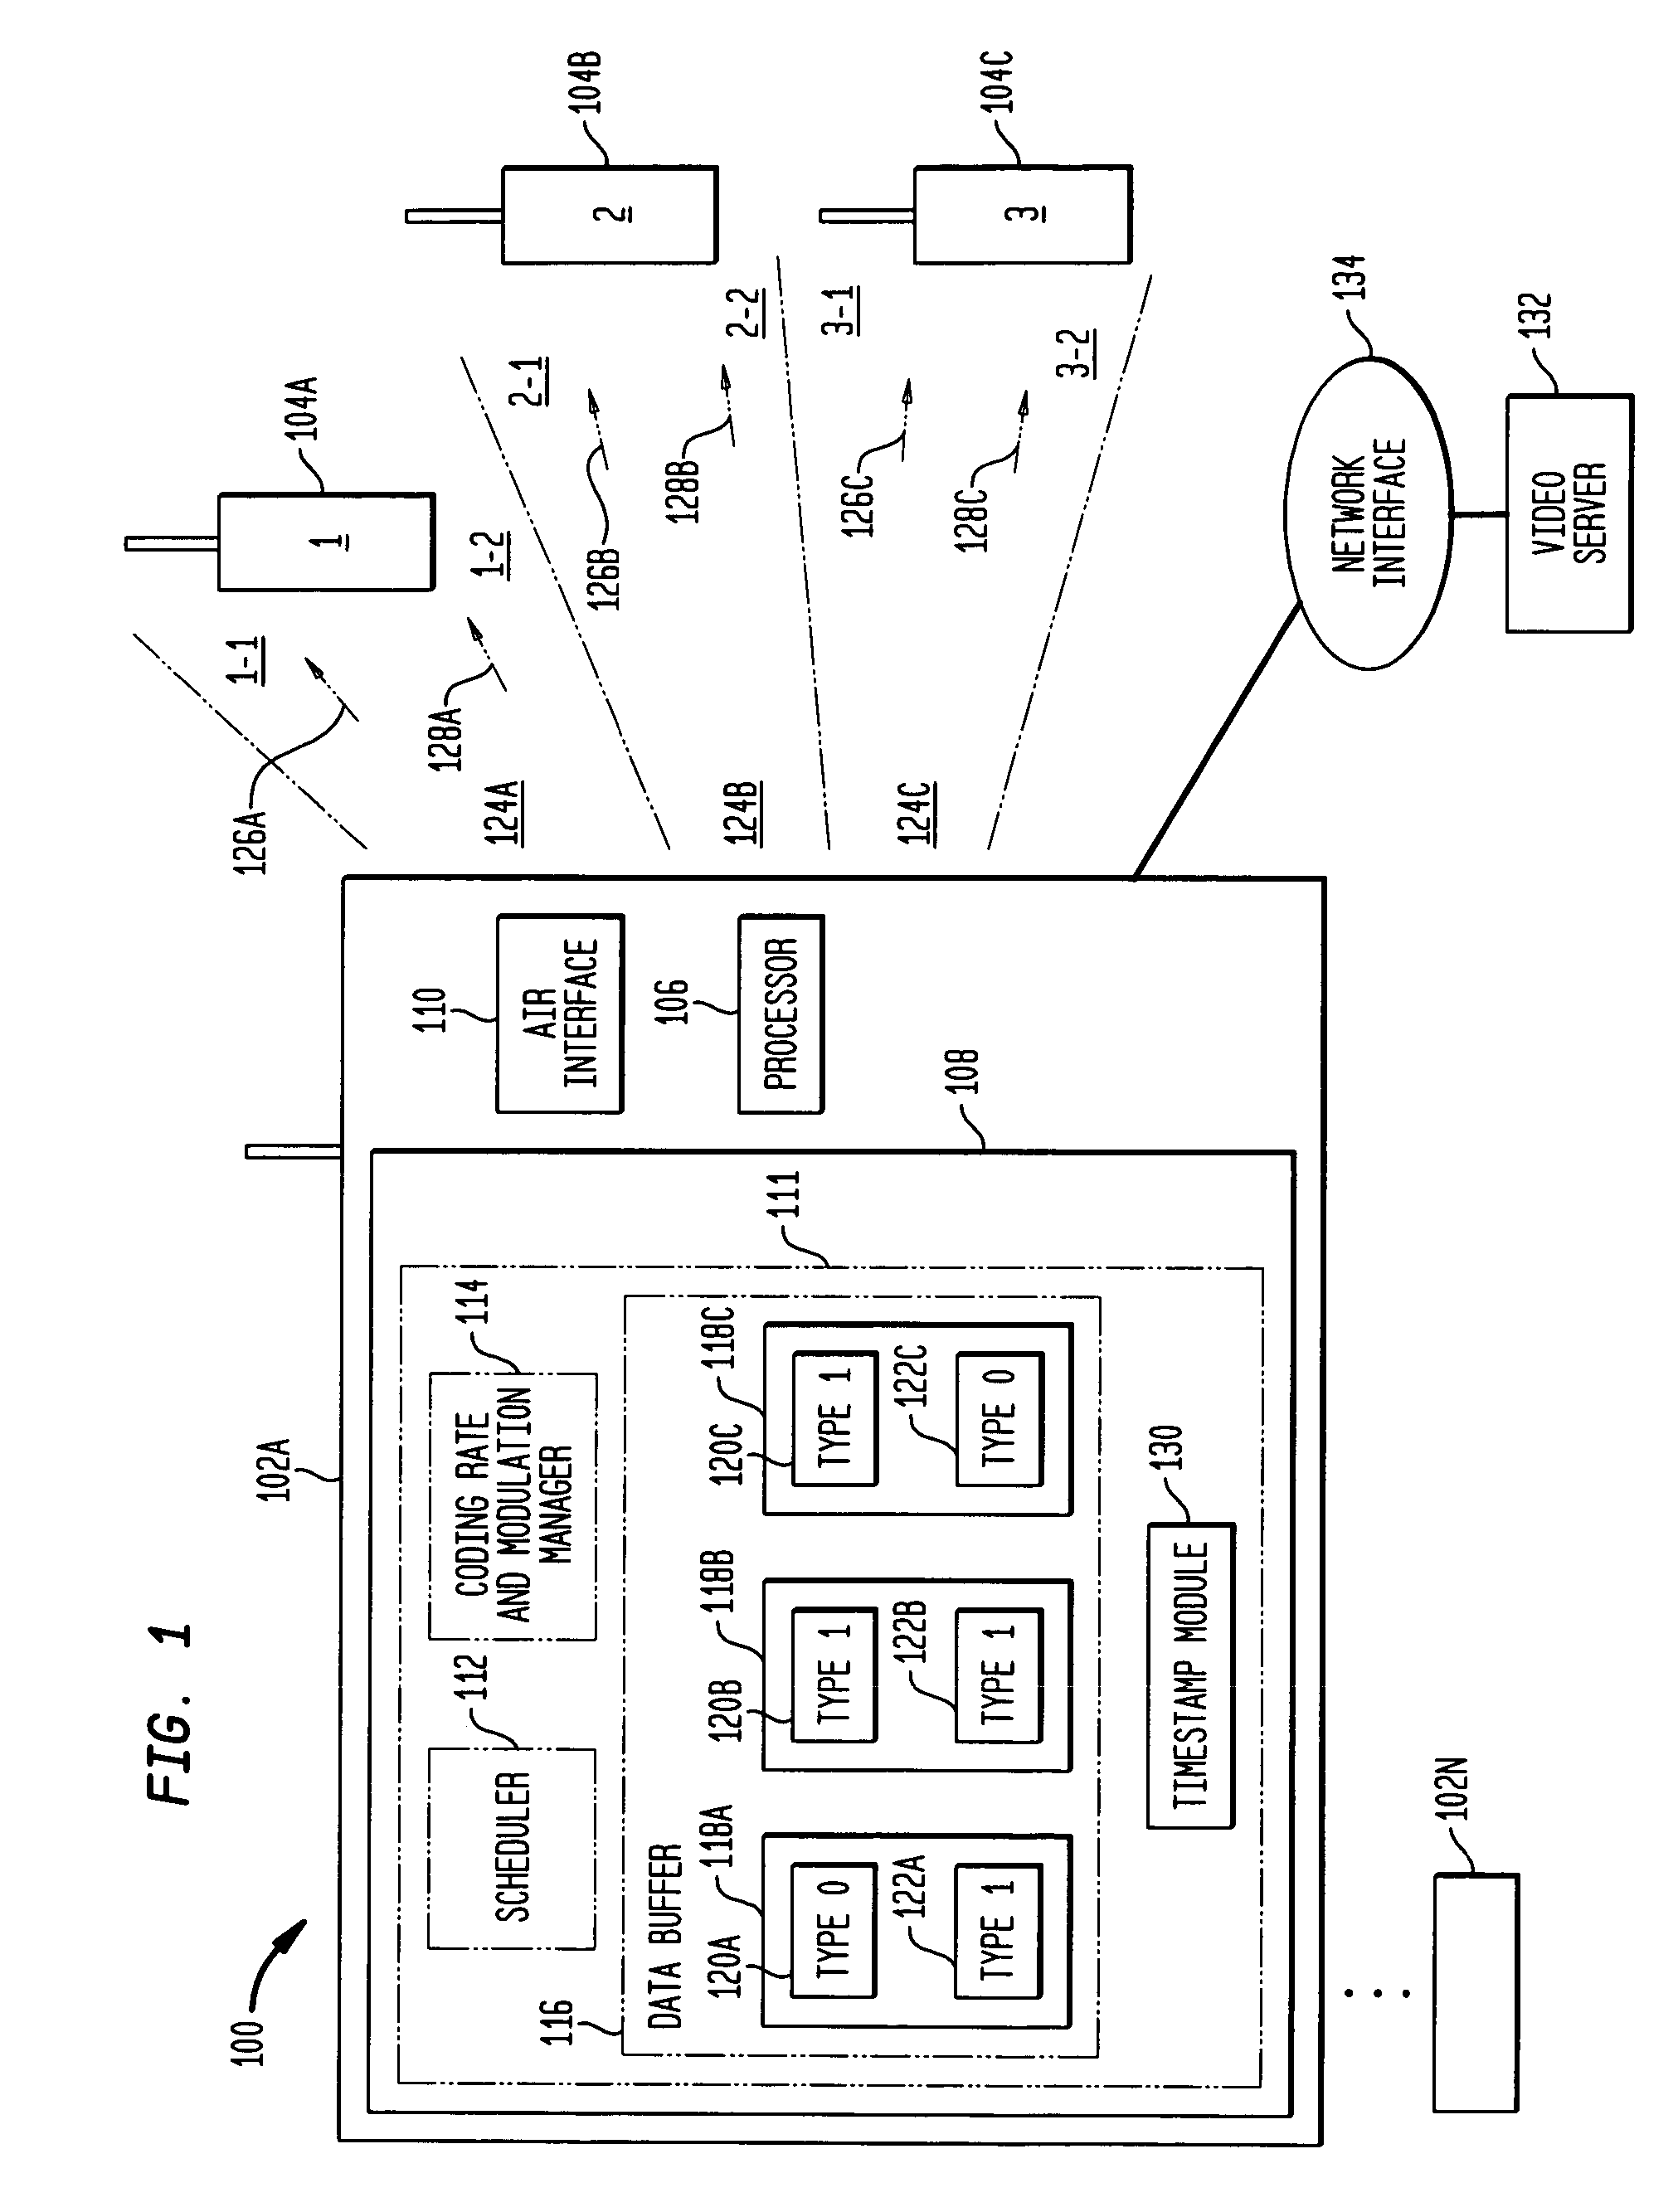 Methods and apparatus for transmission scheduling in wireless networks